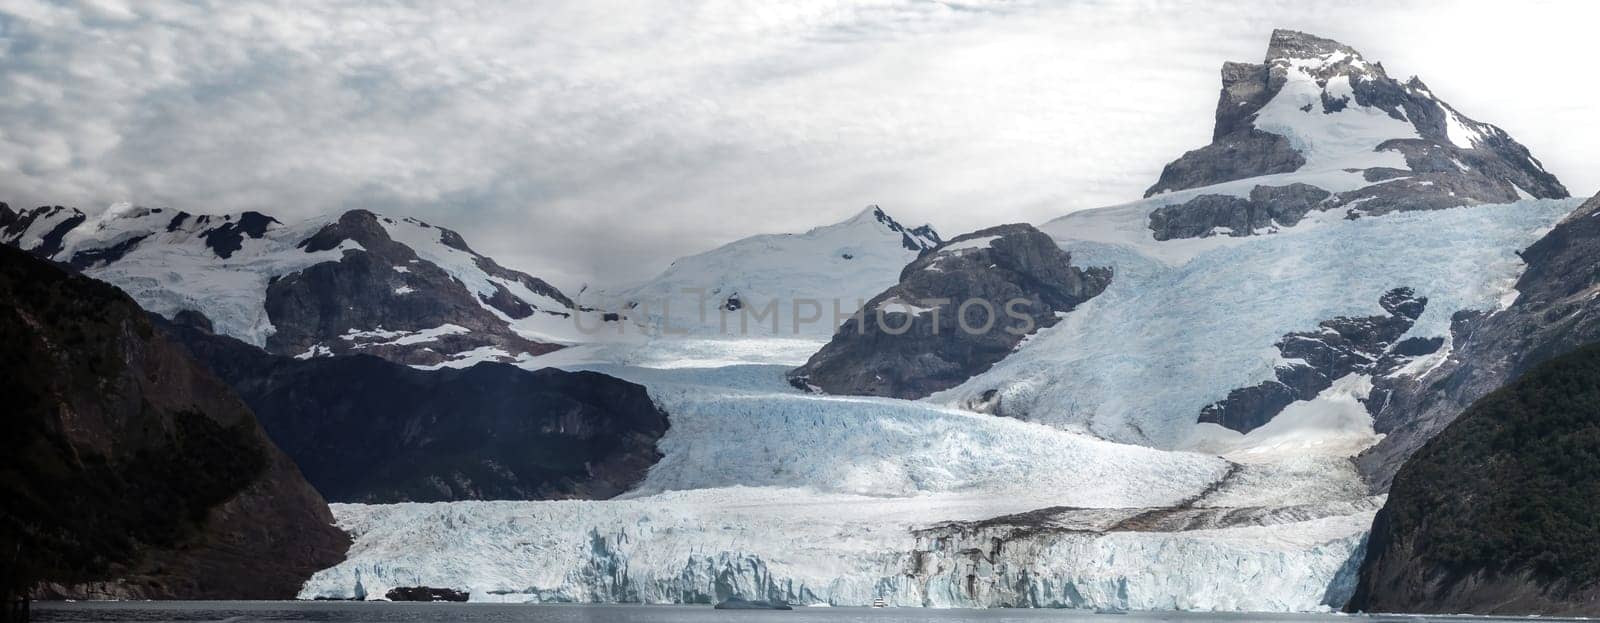 Vast glacier with surrounding snowy peaks and a striking sky.